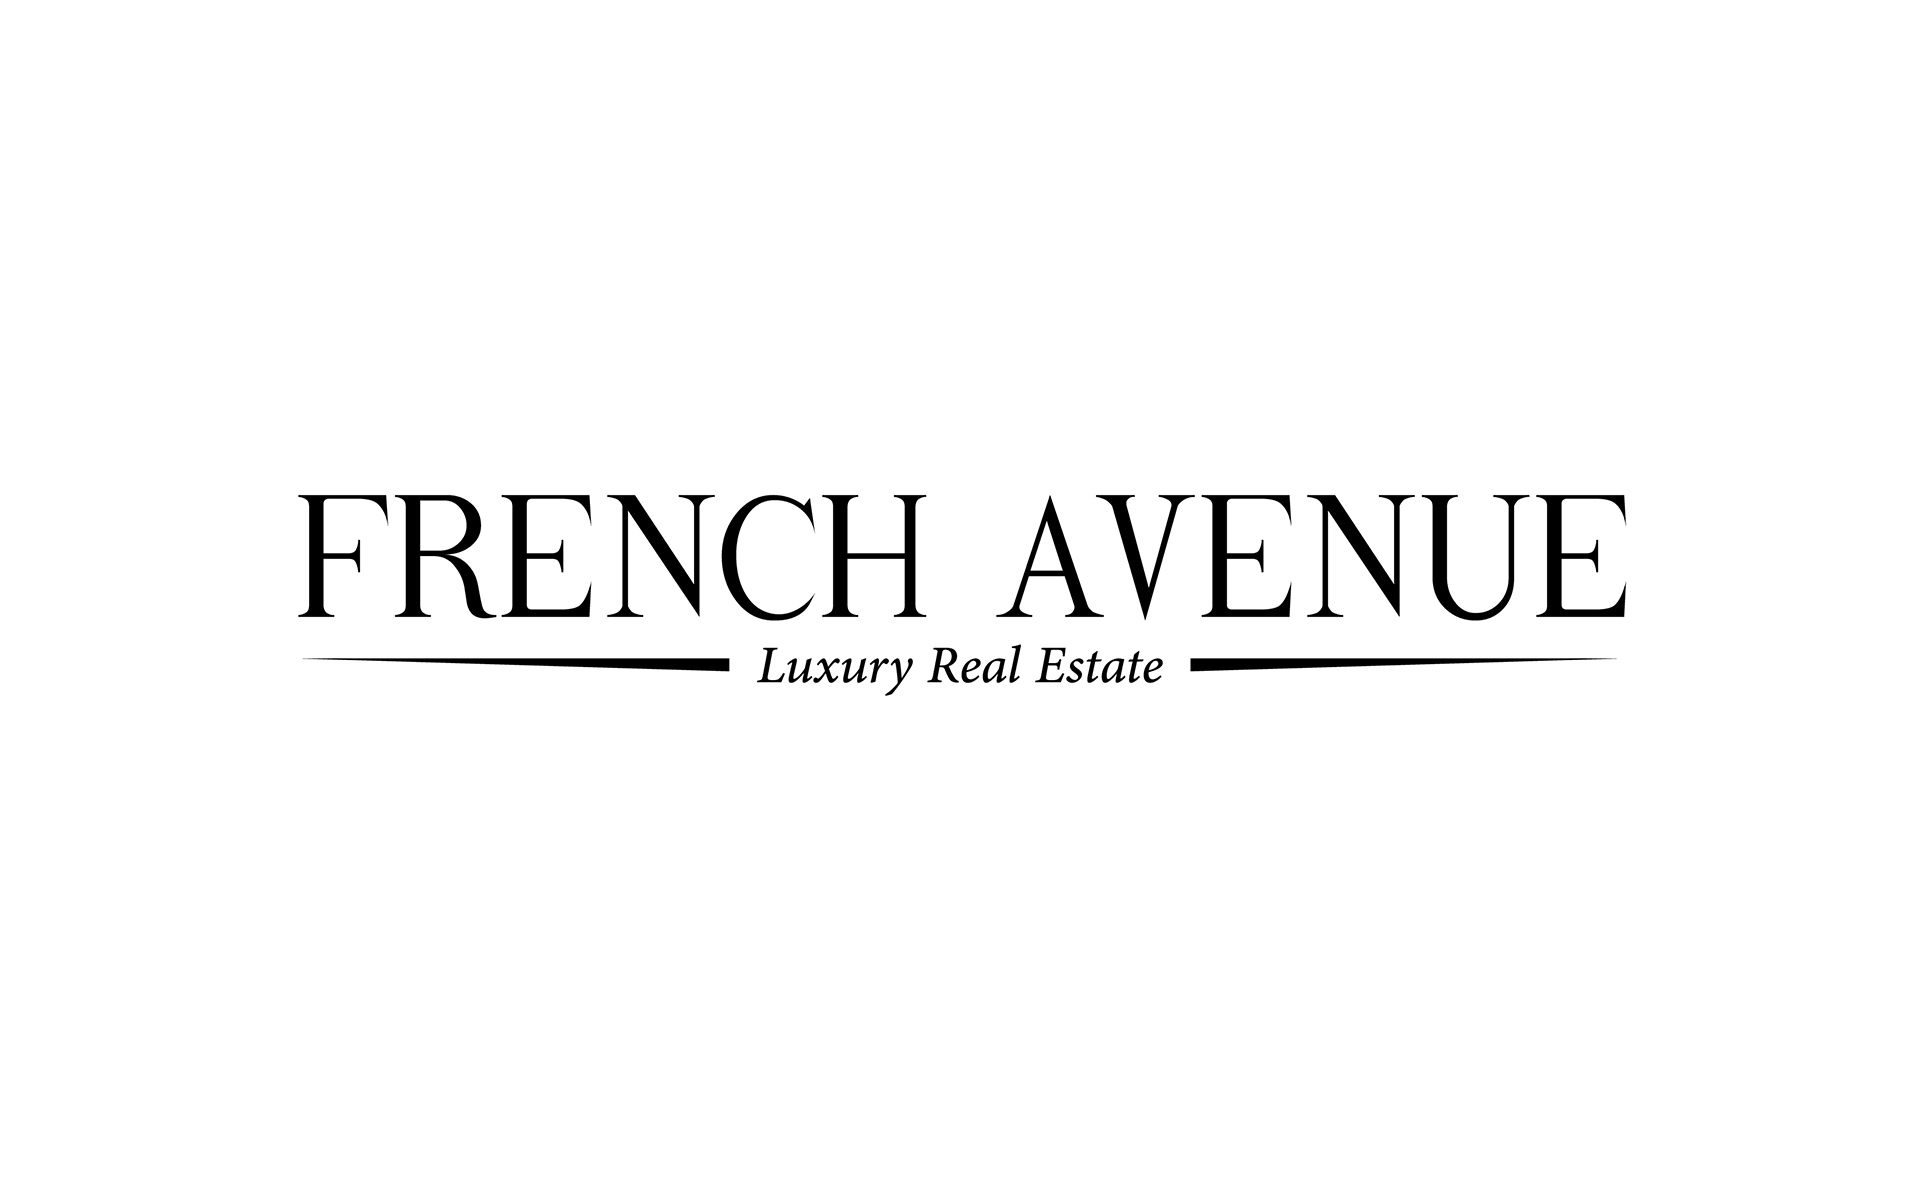 French Avenue